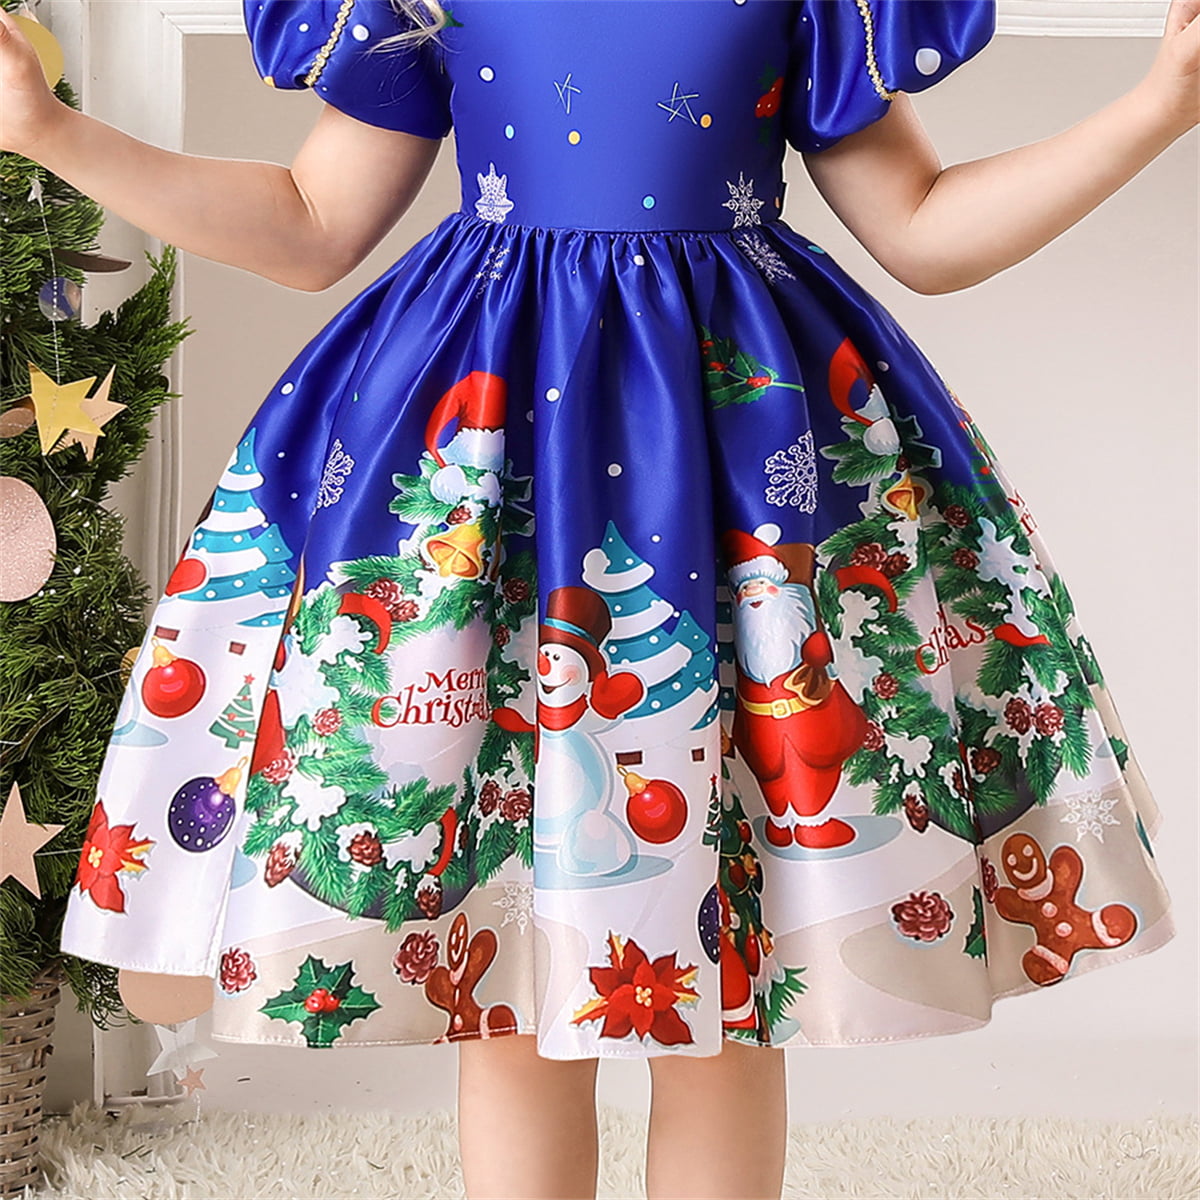 Girls Floral Dress Kids Summer Party Dresses Age 3-9 Years Wedding Holiday Dress 